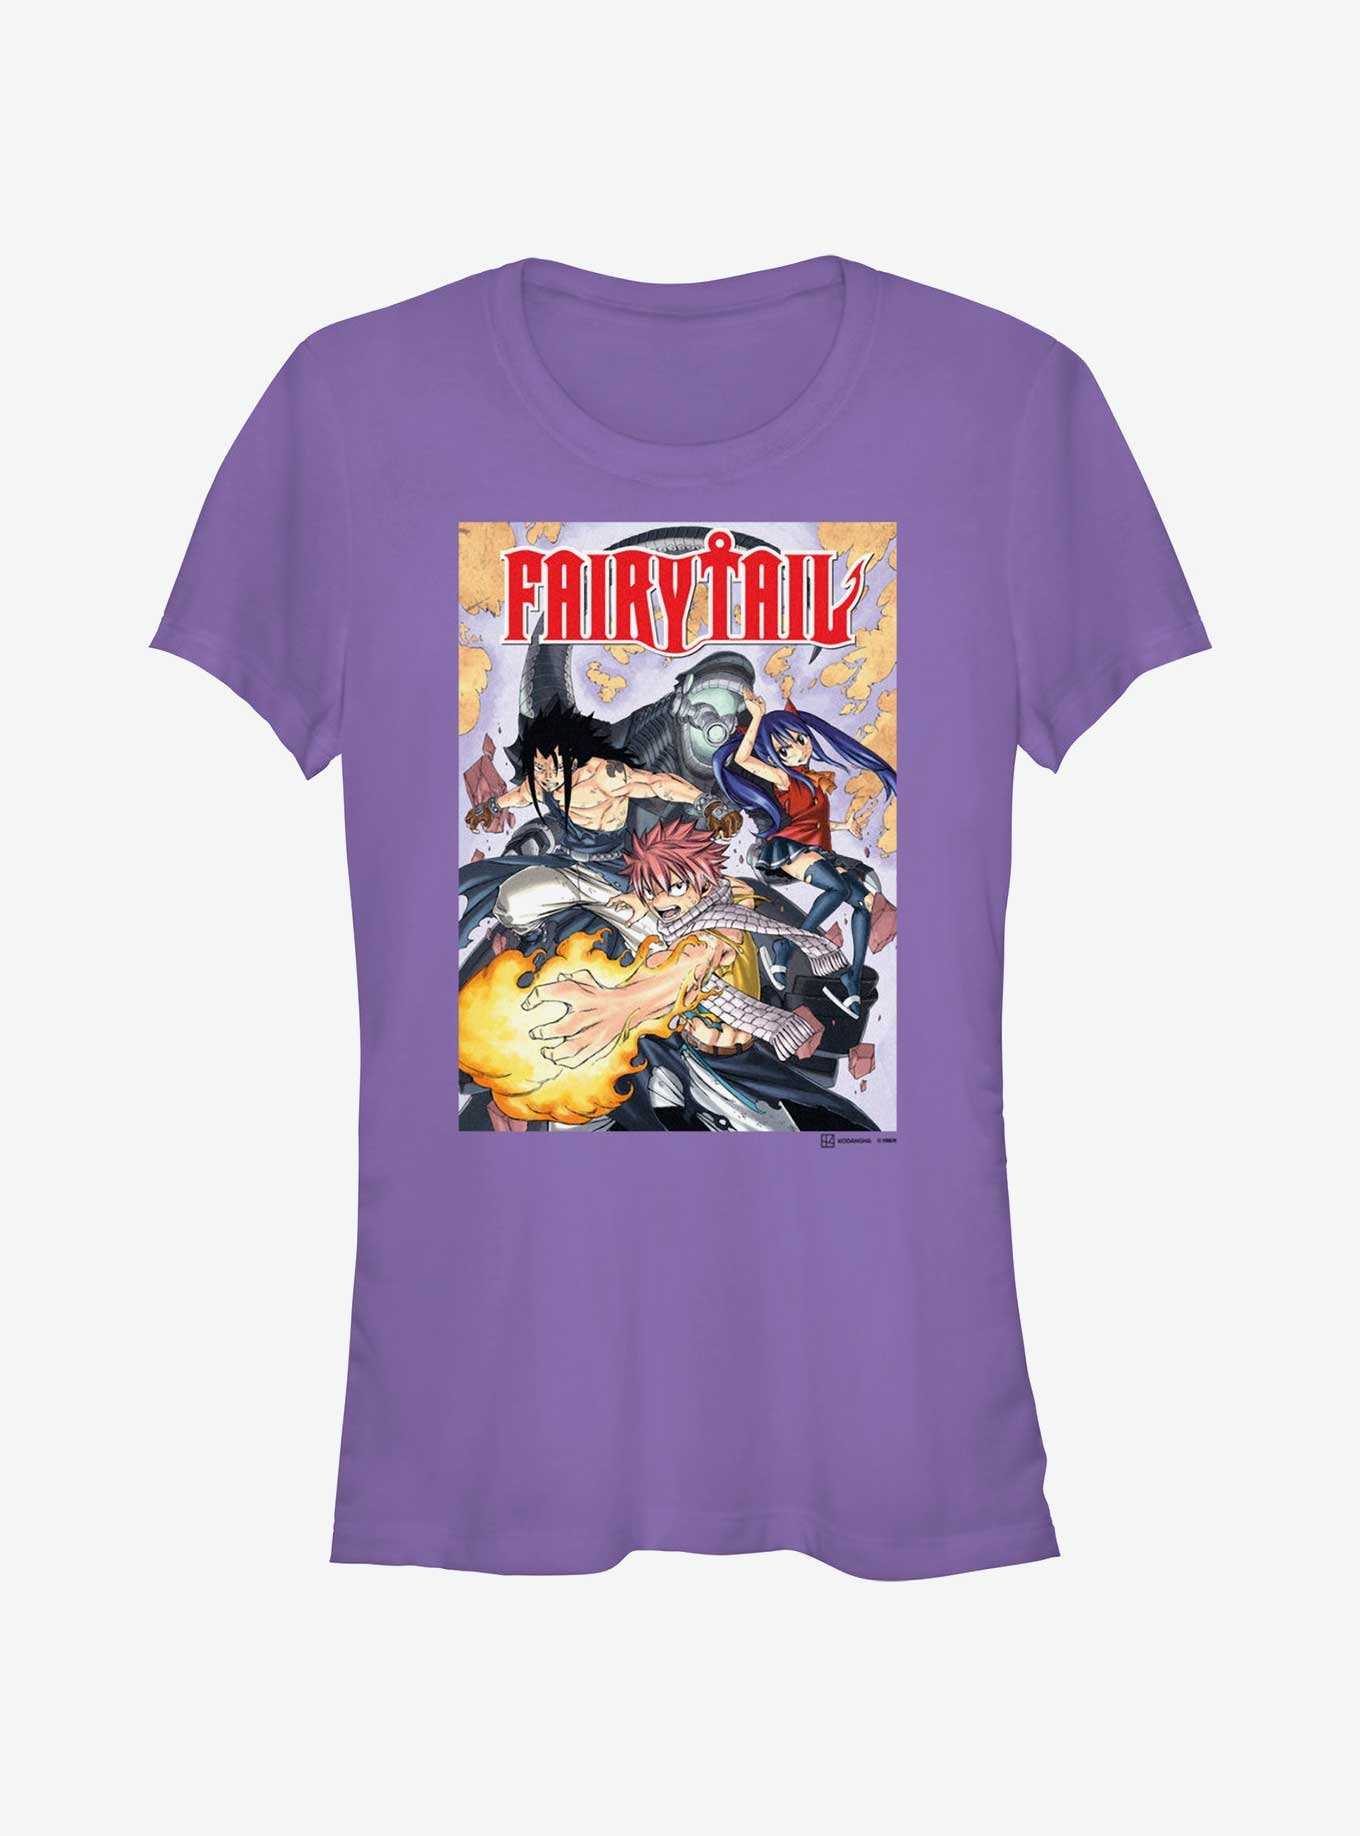 Fairy Tail Cover 2 Girls T-Shirt, , hi-res